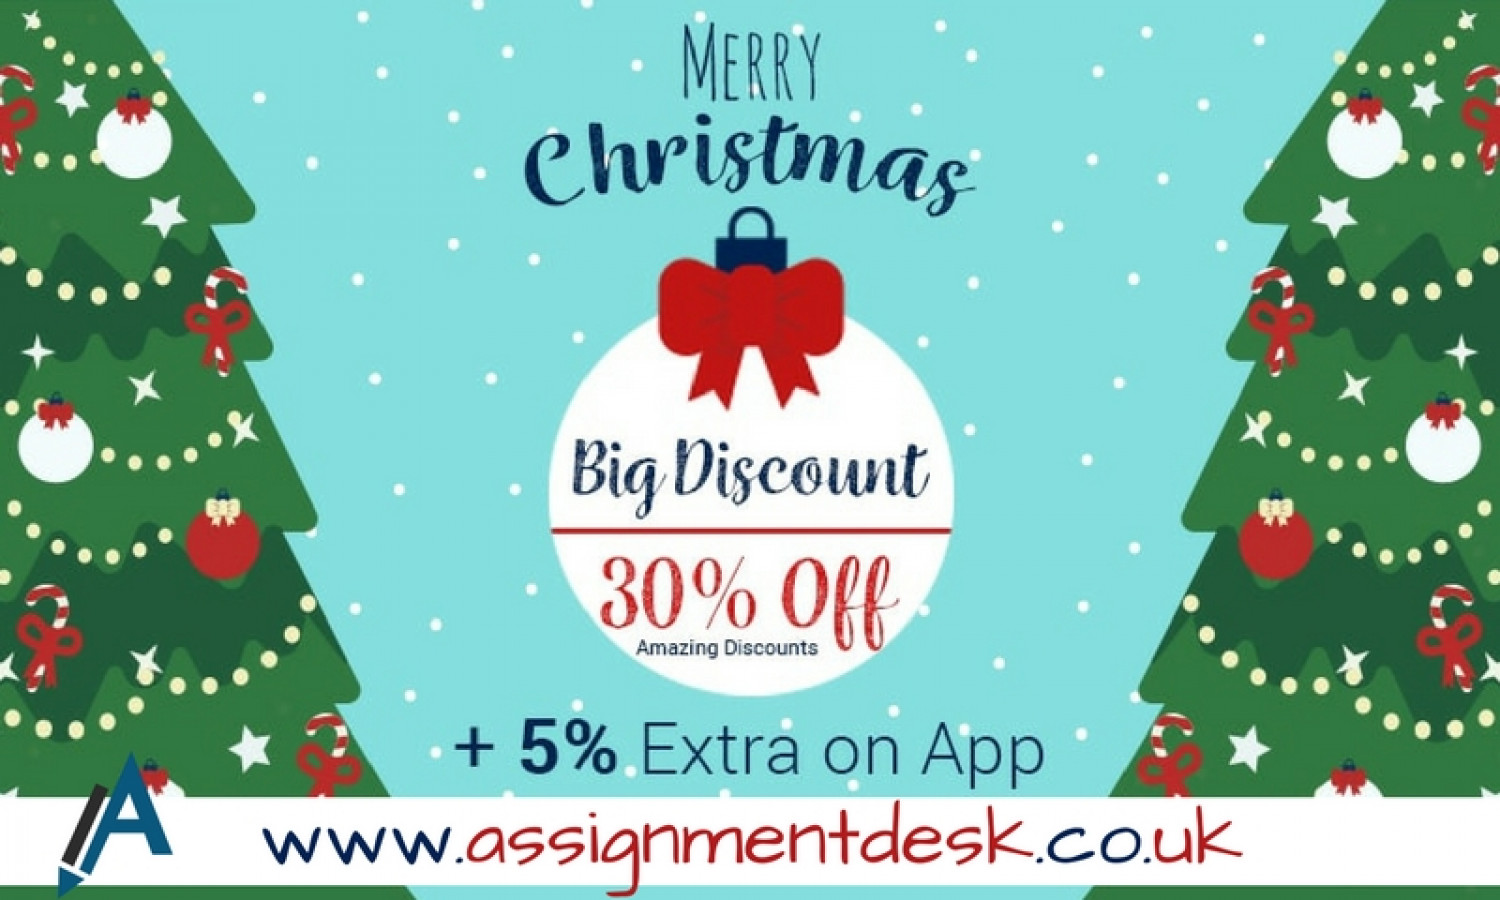 Exciting Xmas Offers on Assignment Orders at Assignment desk Infographic